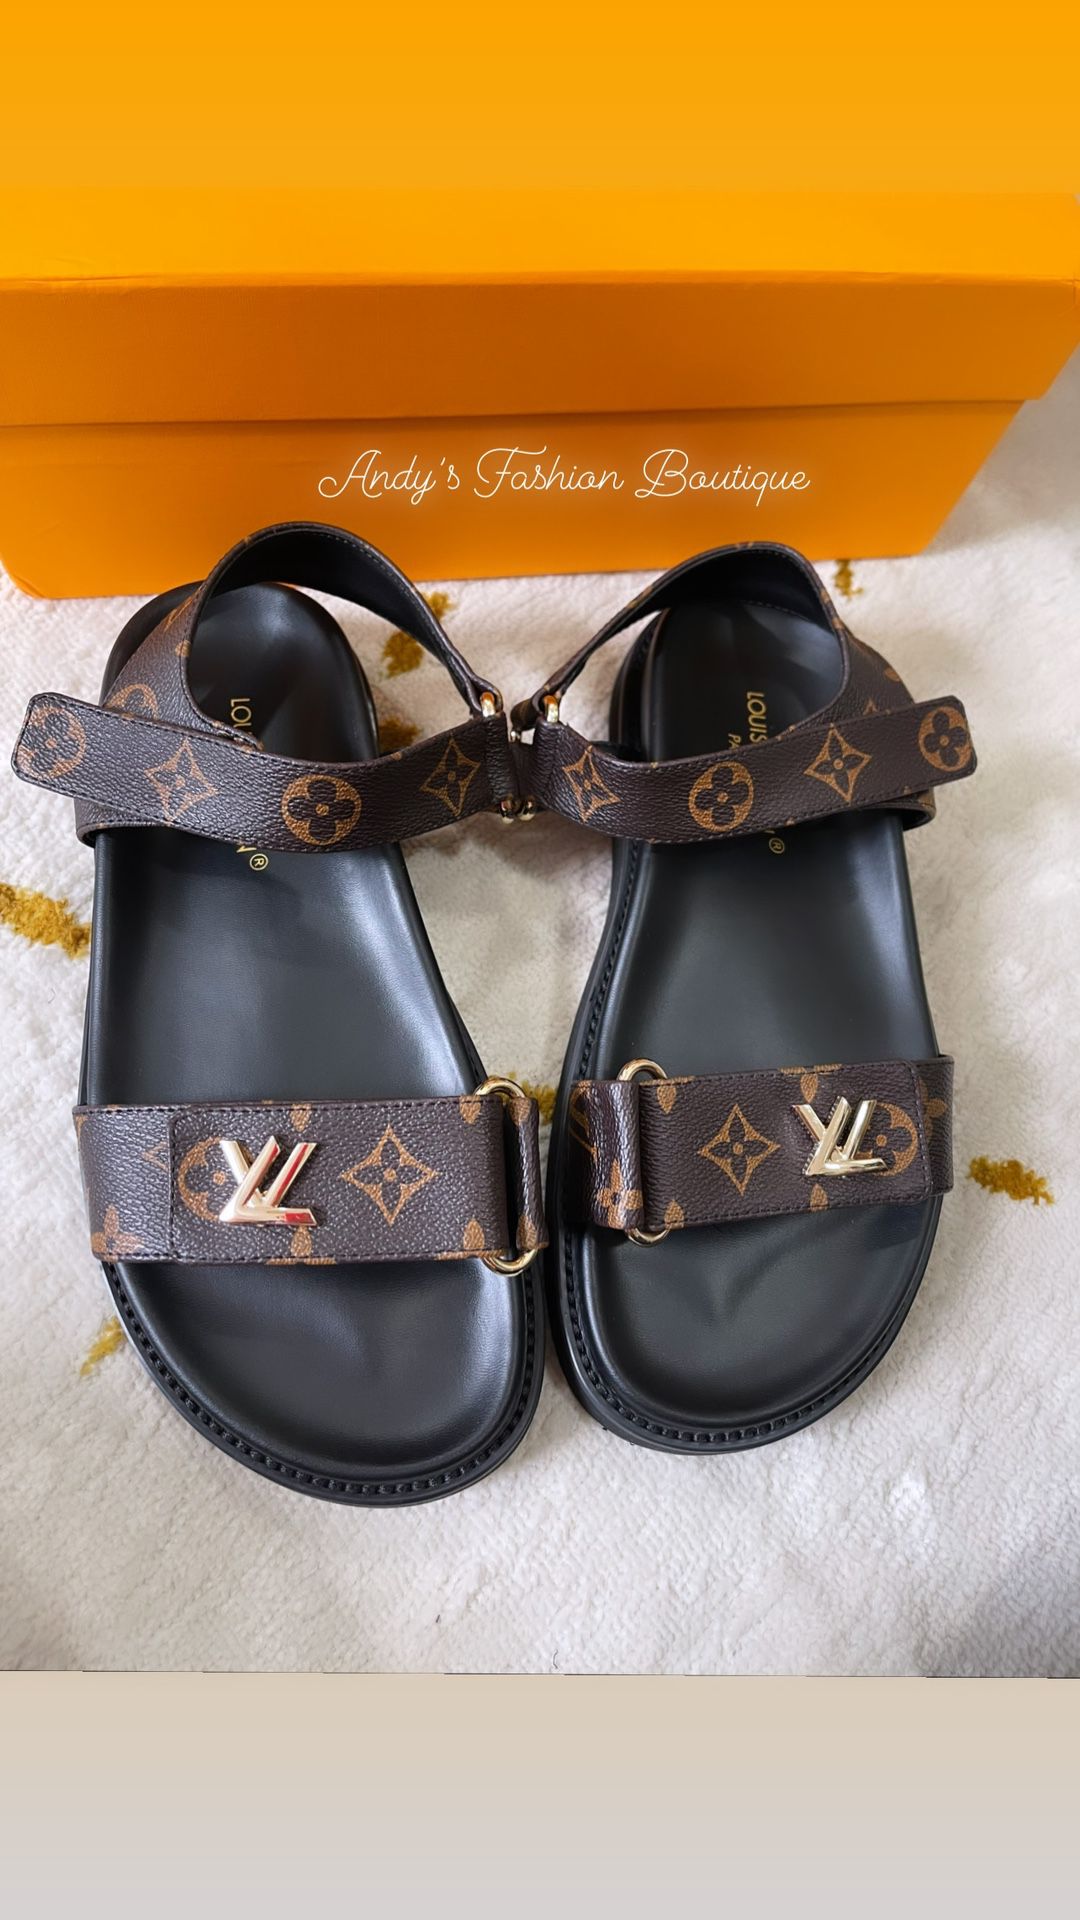 Authentic Gucci Sandals (6.5) Authentic Louis Vuitton Make Up Bag for Sale  in Smithtown, NY - OfferUp